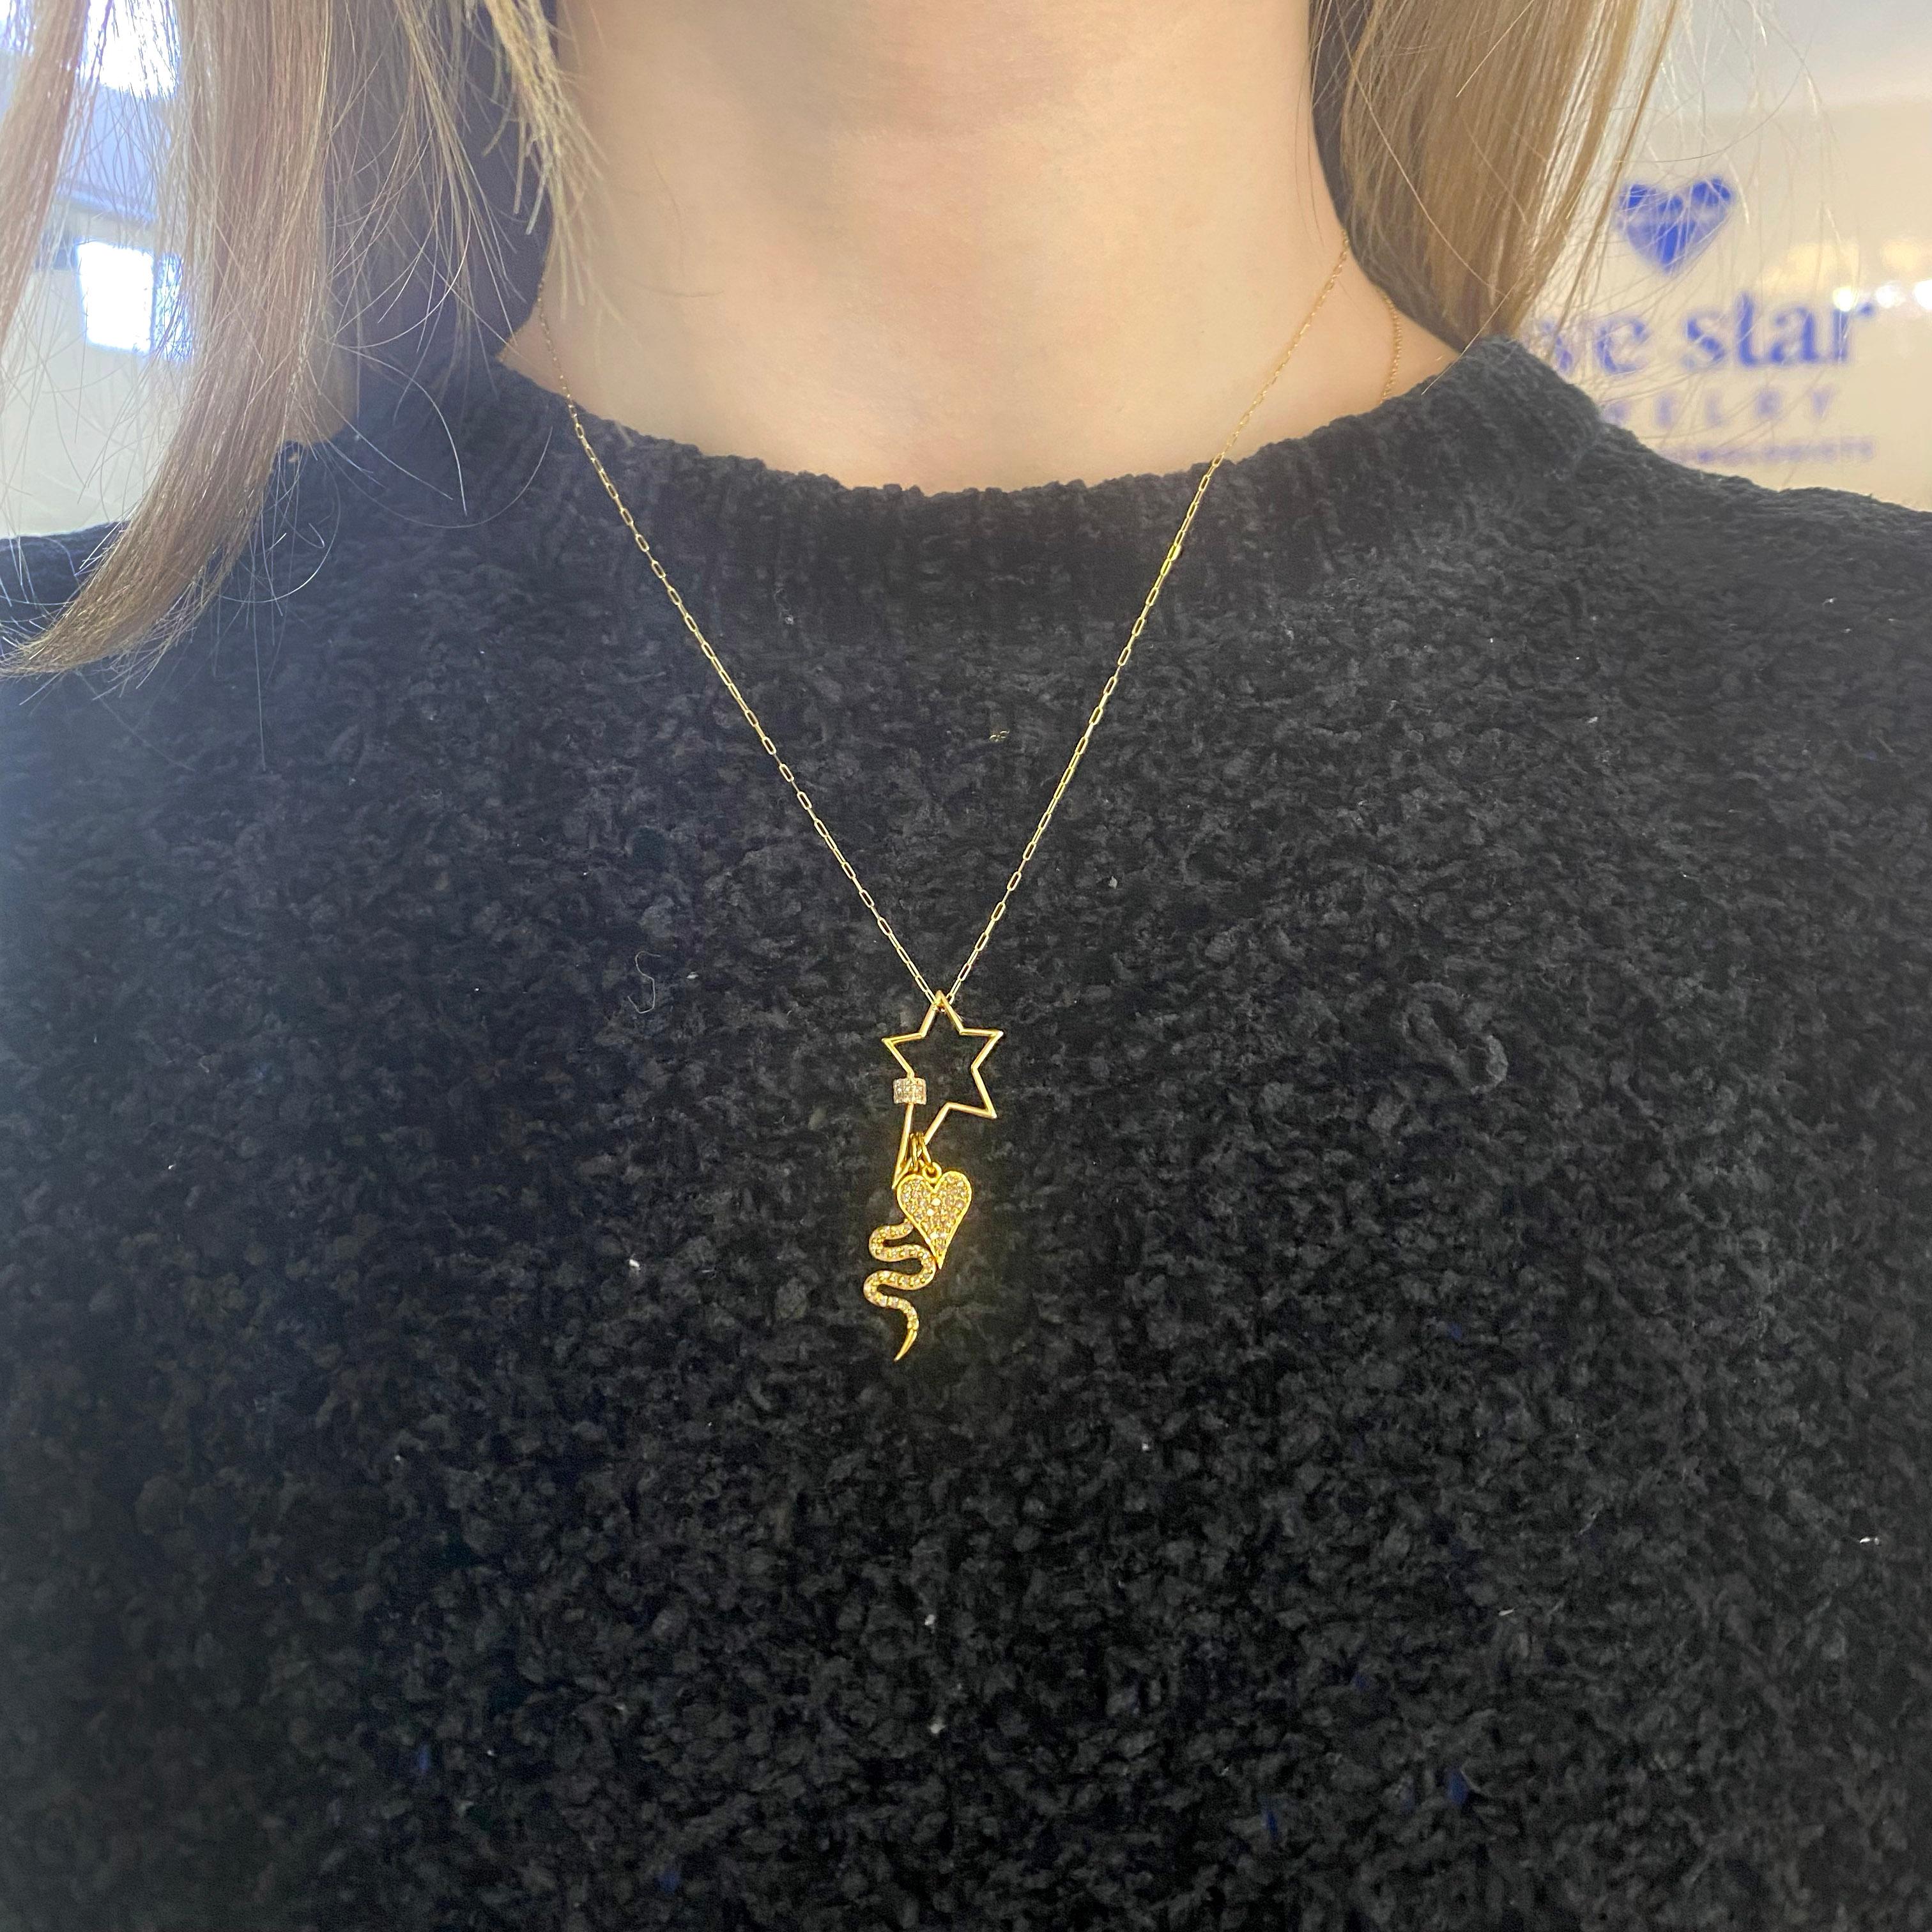 This extraordinary necklace includes the star clasp, snake charm, heart charm, and includes the paperclip necklace and they are all made in solid 14 karat gold and embellished with gorgeous full cut diamonds. Be original and unique with this smart